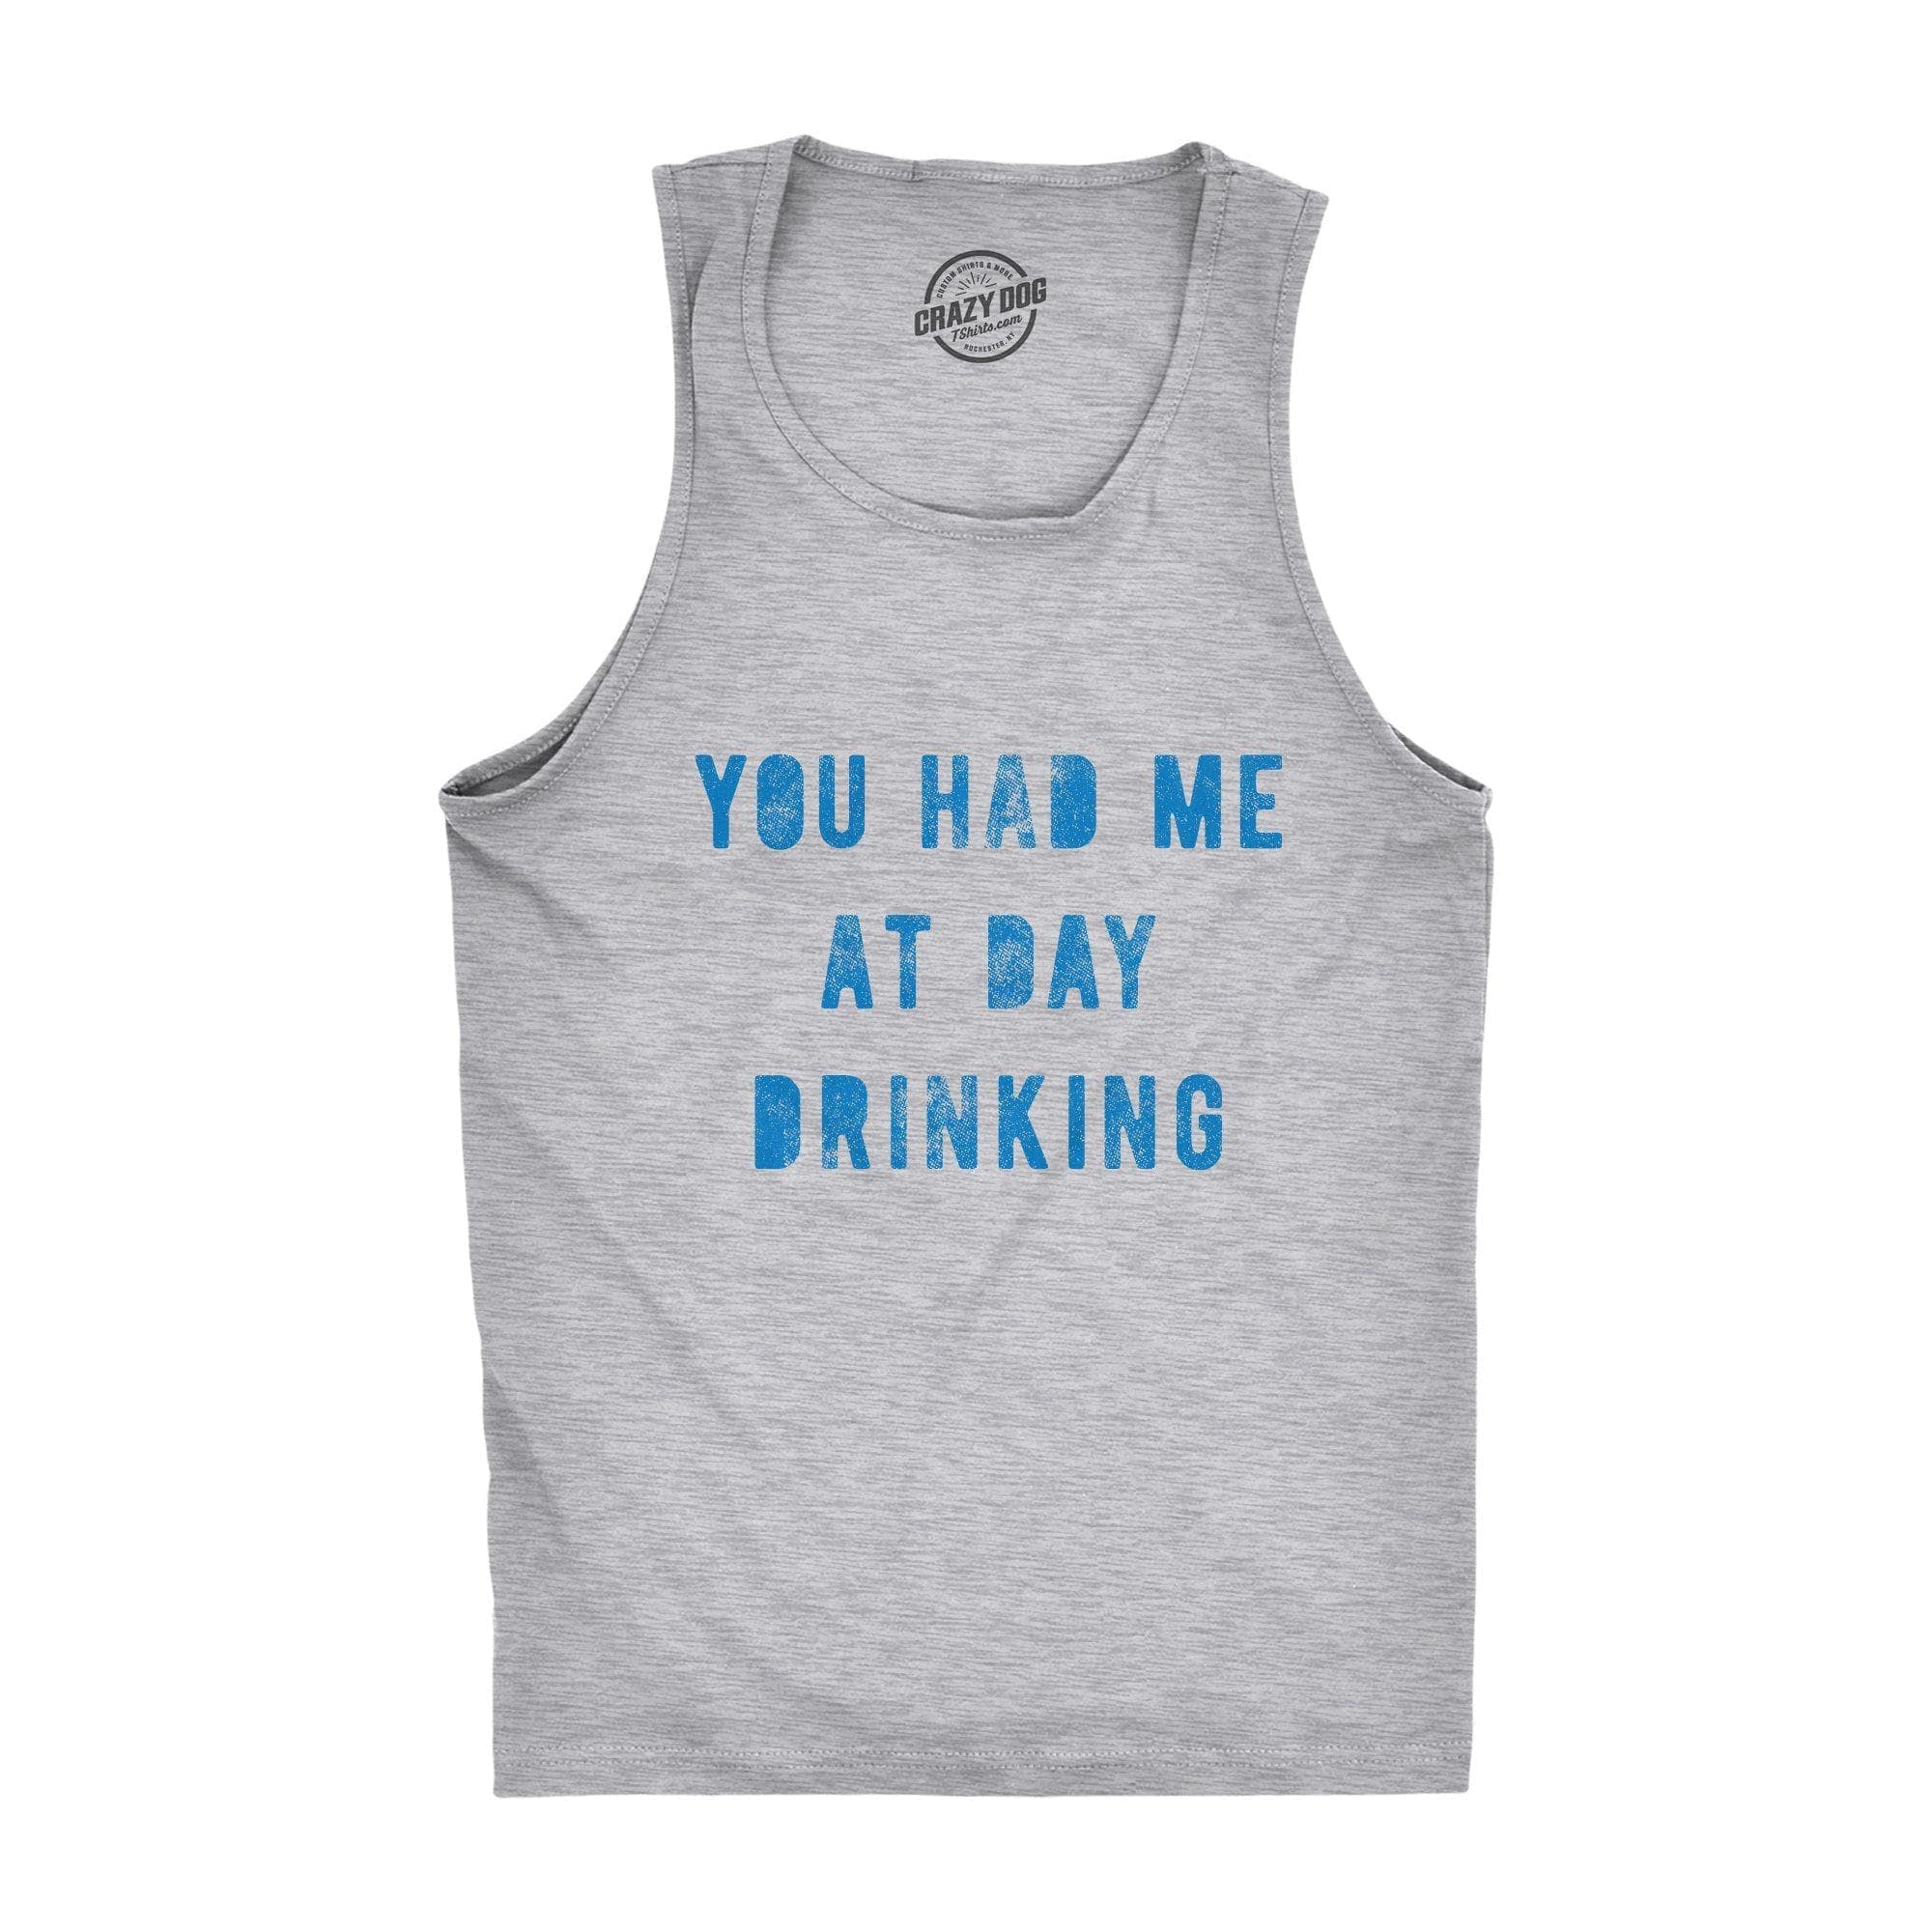 You Had Me At Day Drinking Men's Tank Top - Crazy Dog T-Shirts